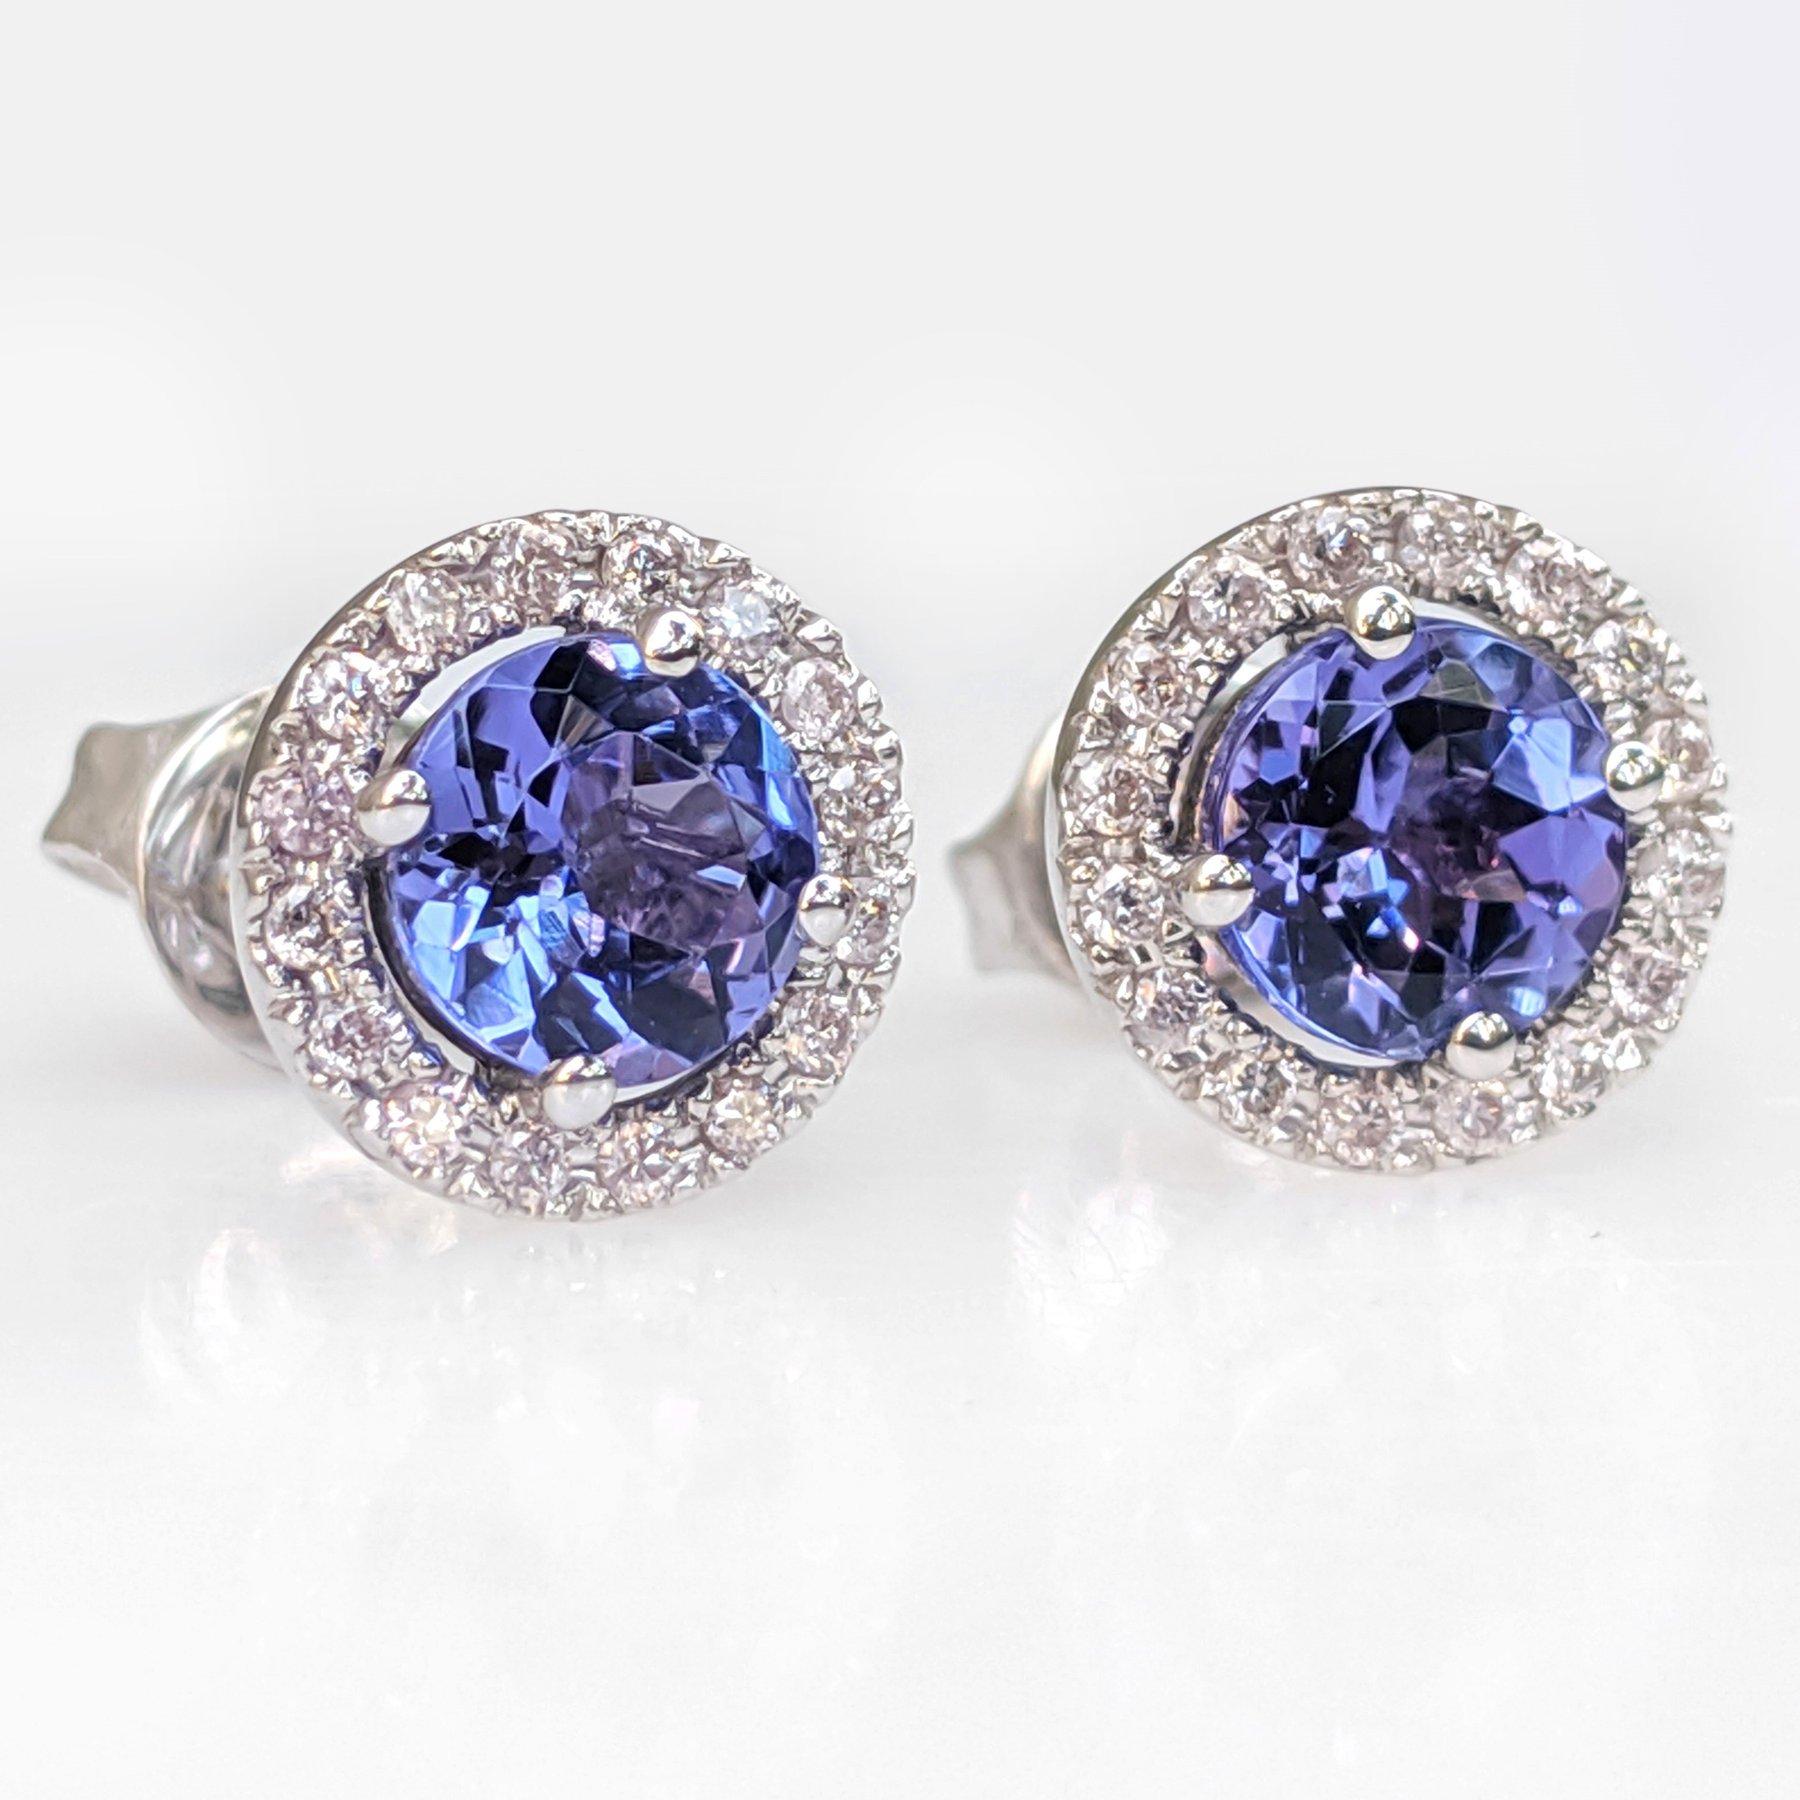 Women's NO RESERVE! 1.48Ct Tanzanite & 0.25Ct Pink Diamonds 14 kt. White gold Earrings For Sale